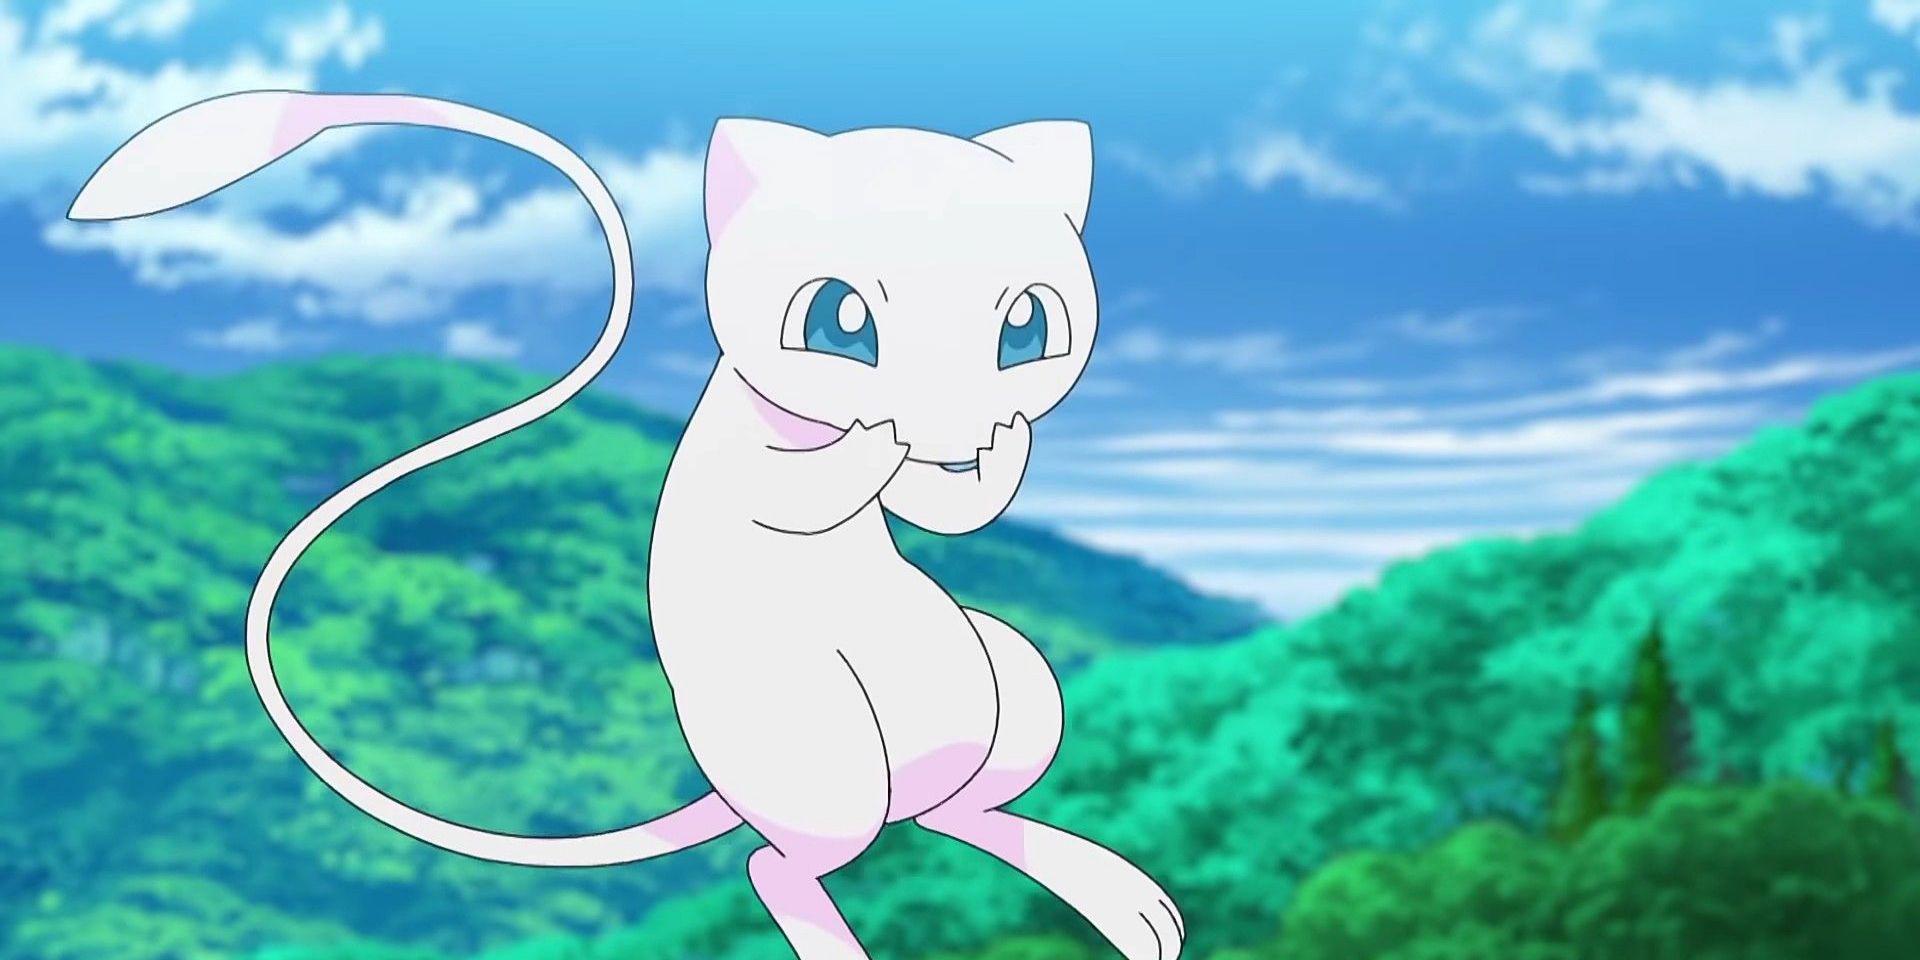 Mew holds its paws to its face in the Pokemon anime